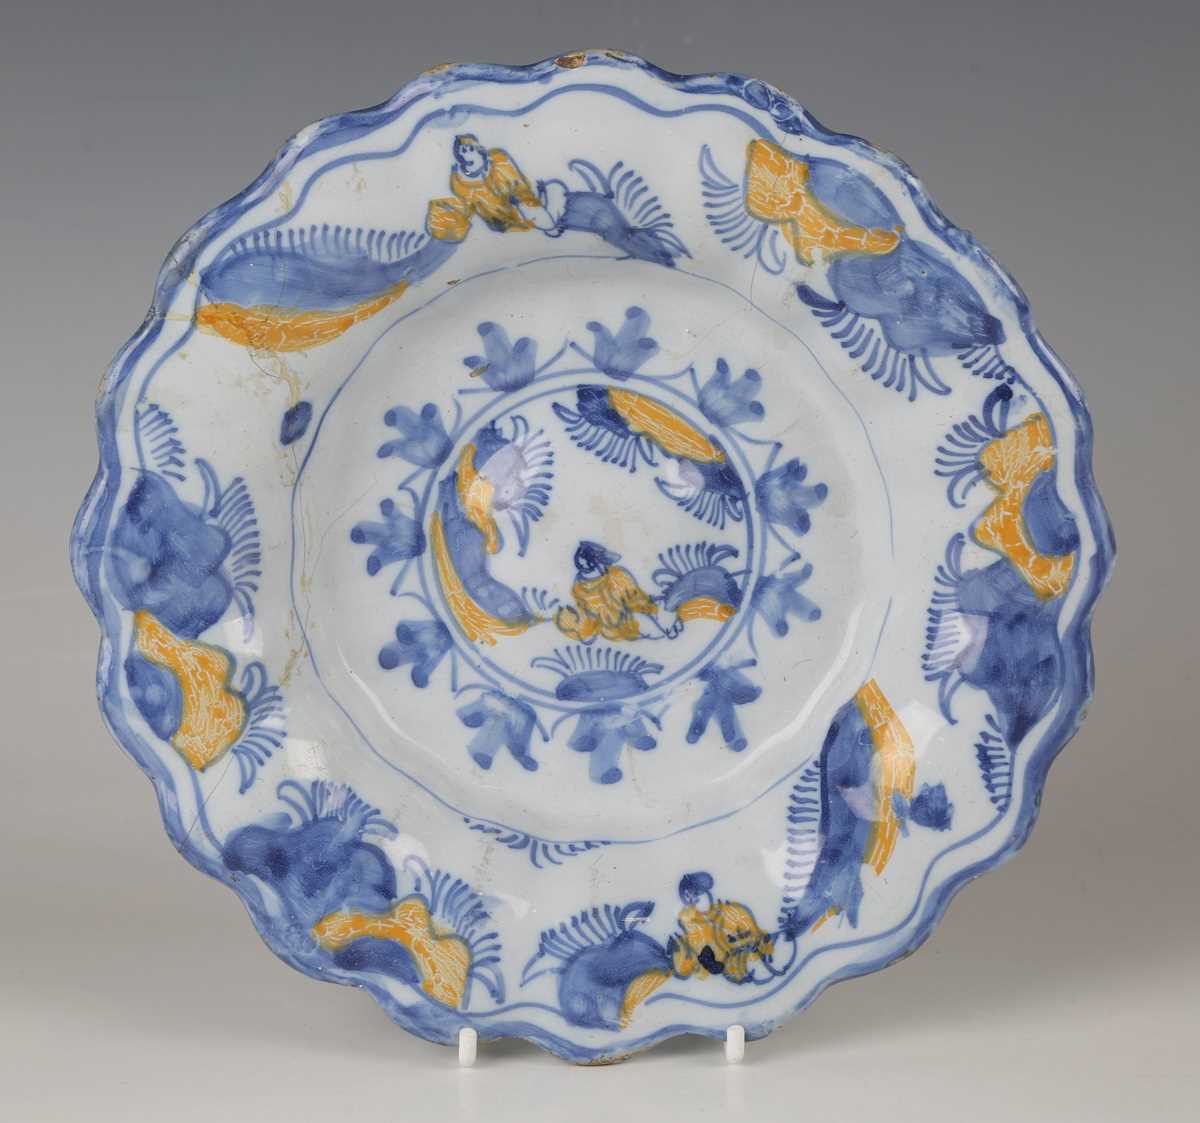 A Dutch Delft lobed buckle dish, circa 1700, painted in blue and yellow with Chinese figures to